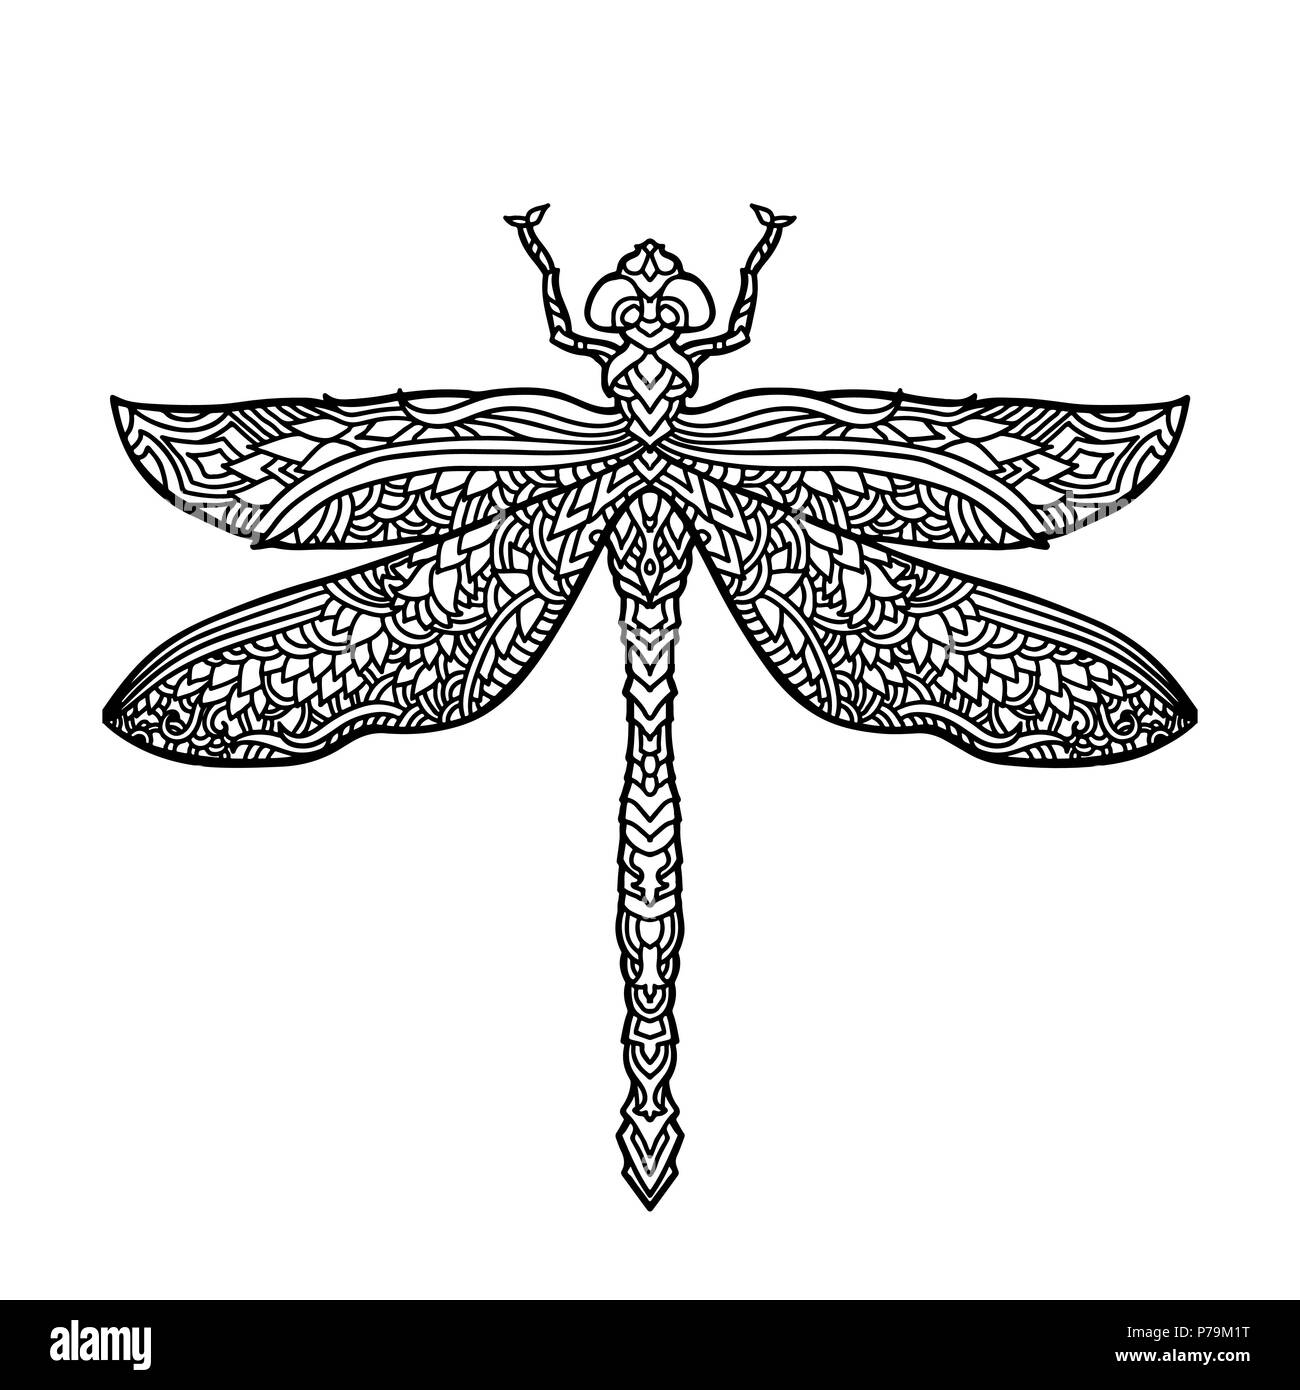 Bllack and white dragonfly in mandala style. Stylized insect. Boho vector illustration. Ethnic pattern. Stock Vector